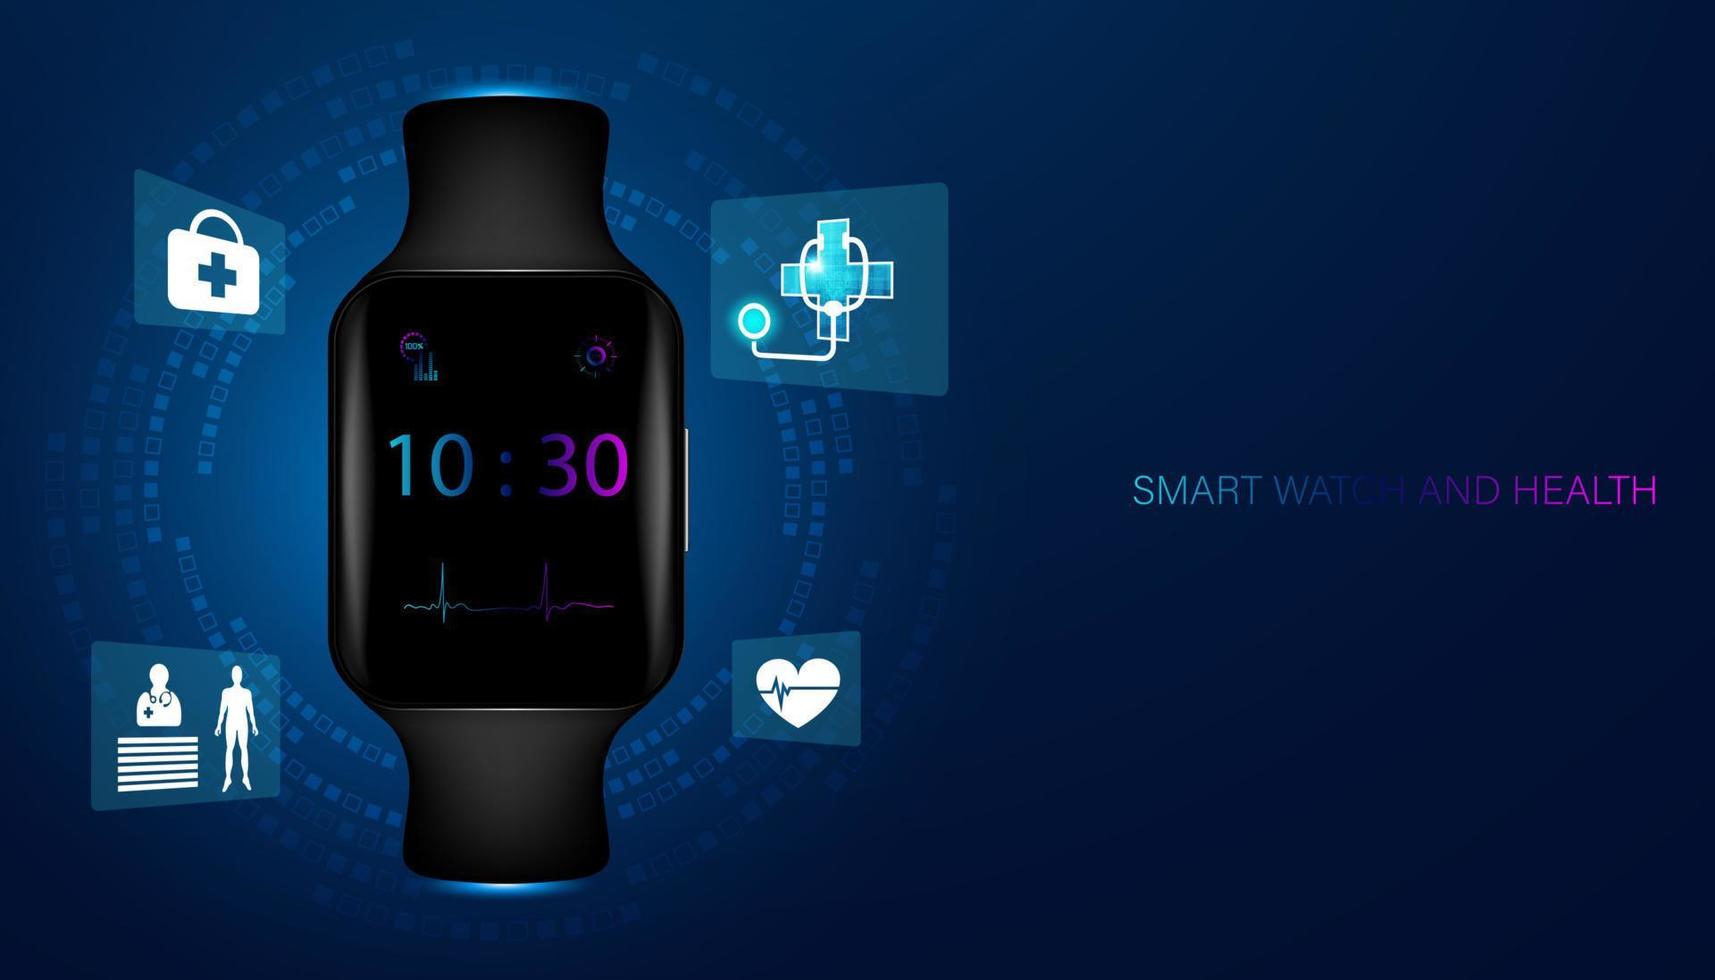 Abstract Smart Watch Health Health Tracking and health care notifications on background modern futuristic vector